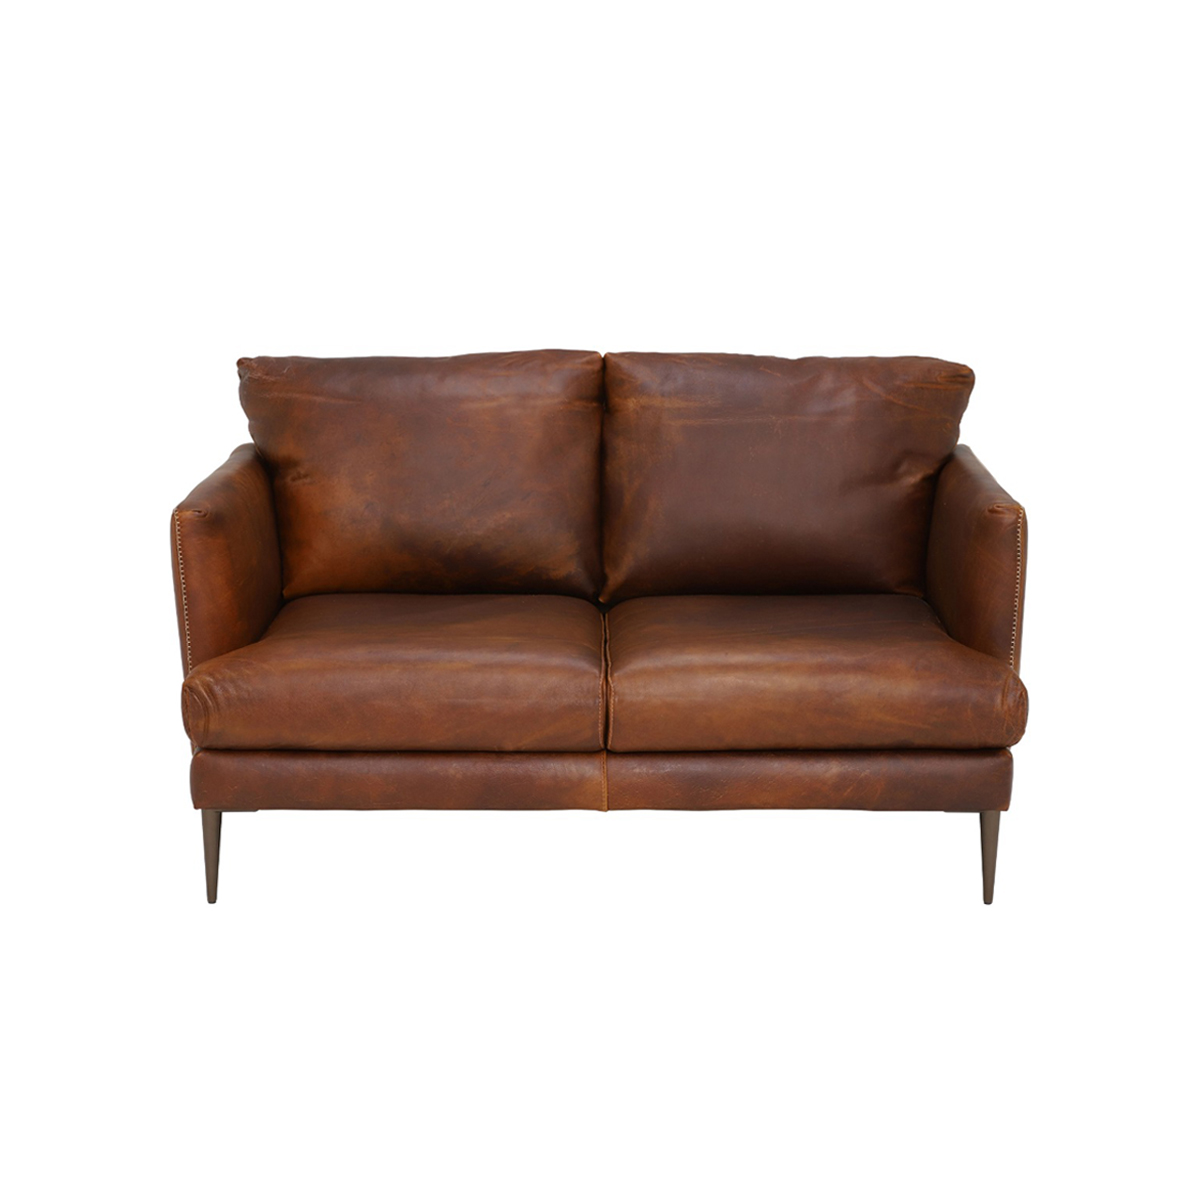 Photo of Acacia loveseat sofa in brown leather